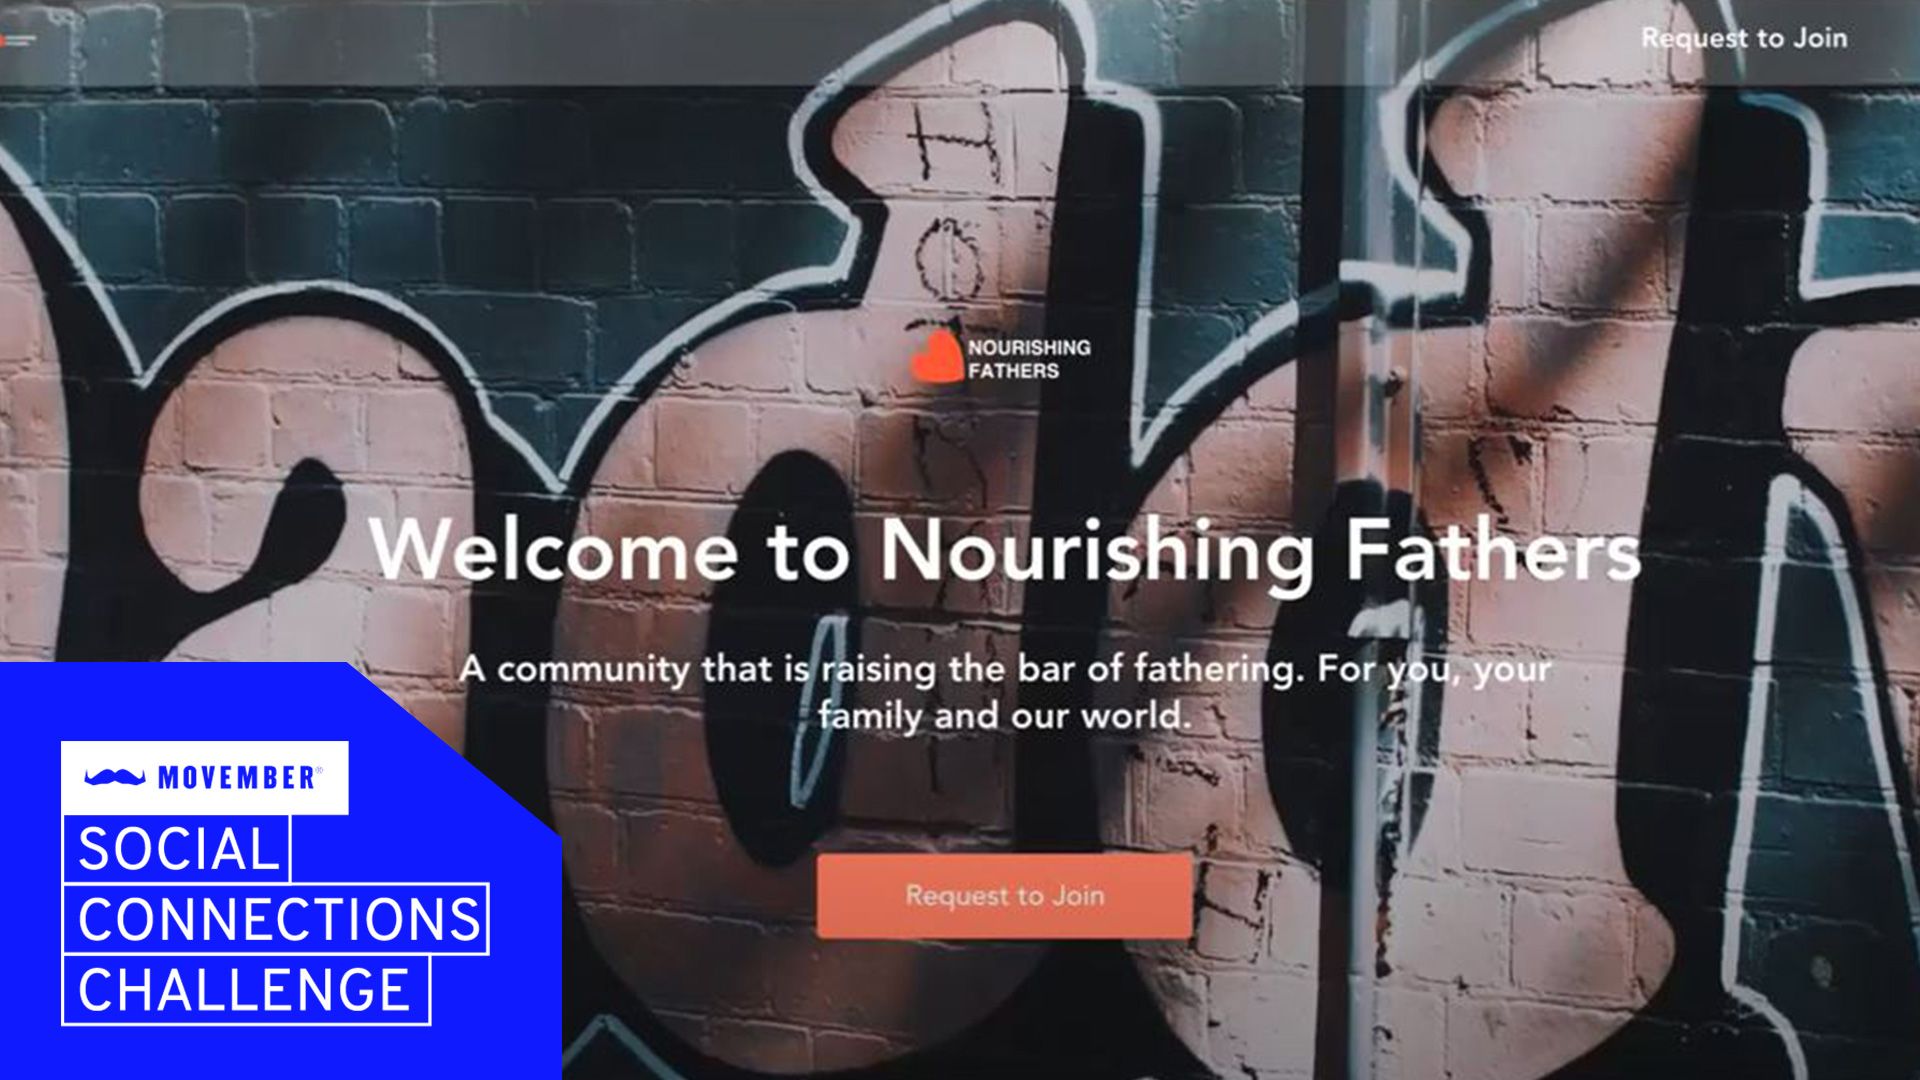 A screengrab of the Nourishing Fathers Community website